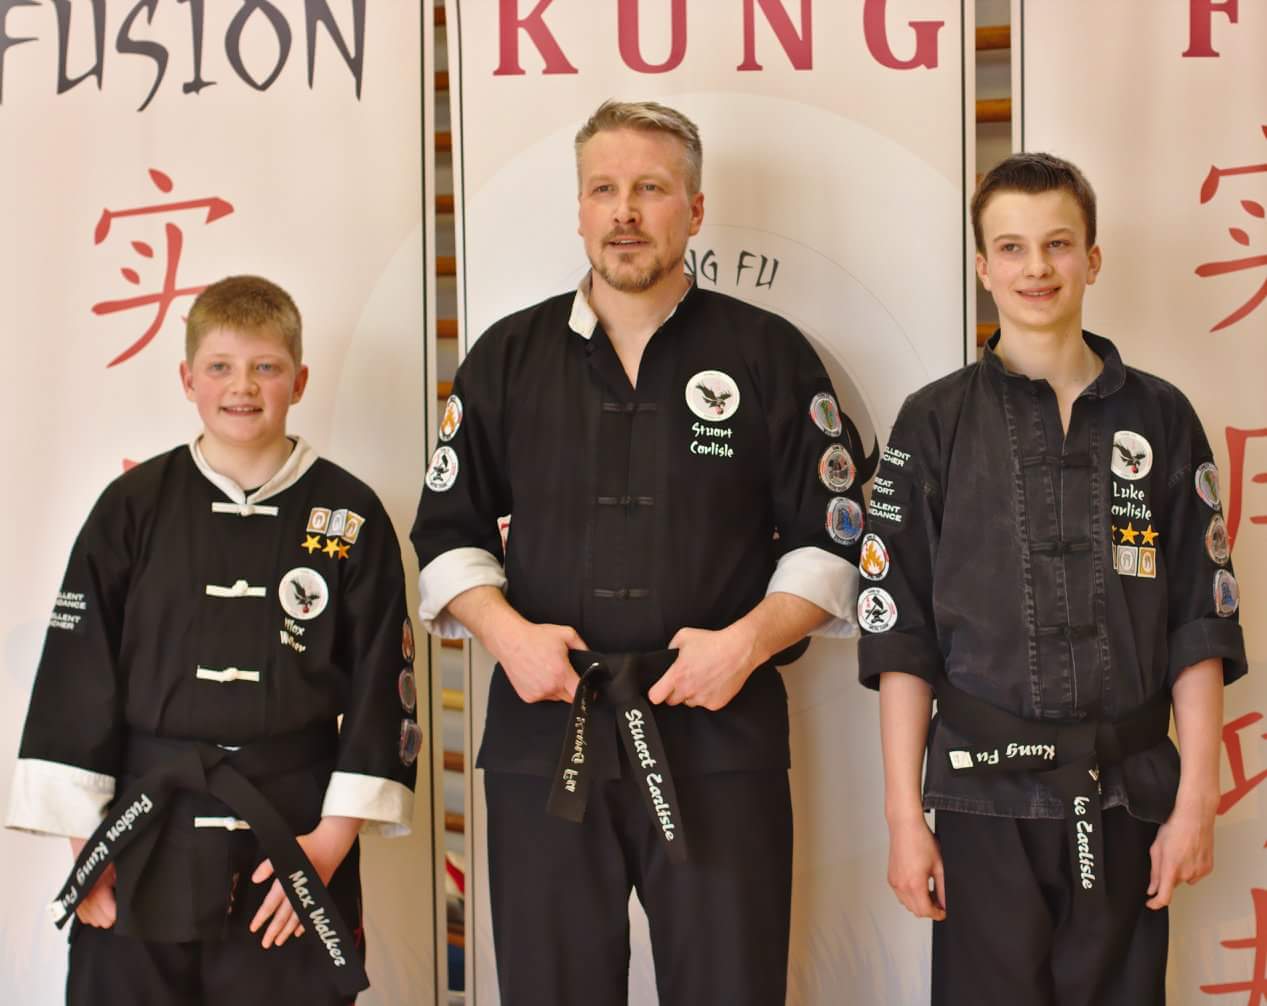 Successful black belts at Fusion Kung Fu in Norwich